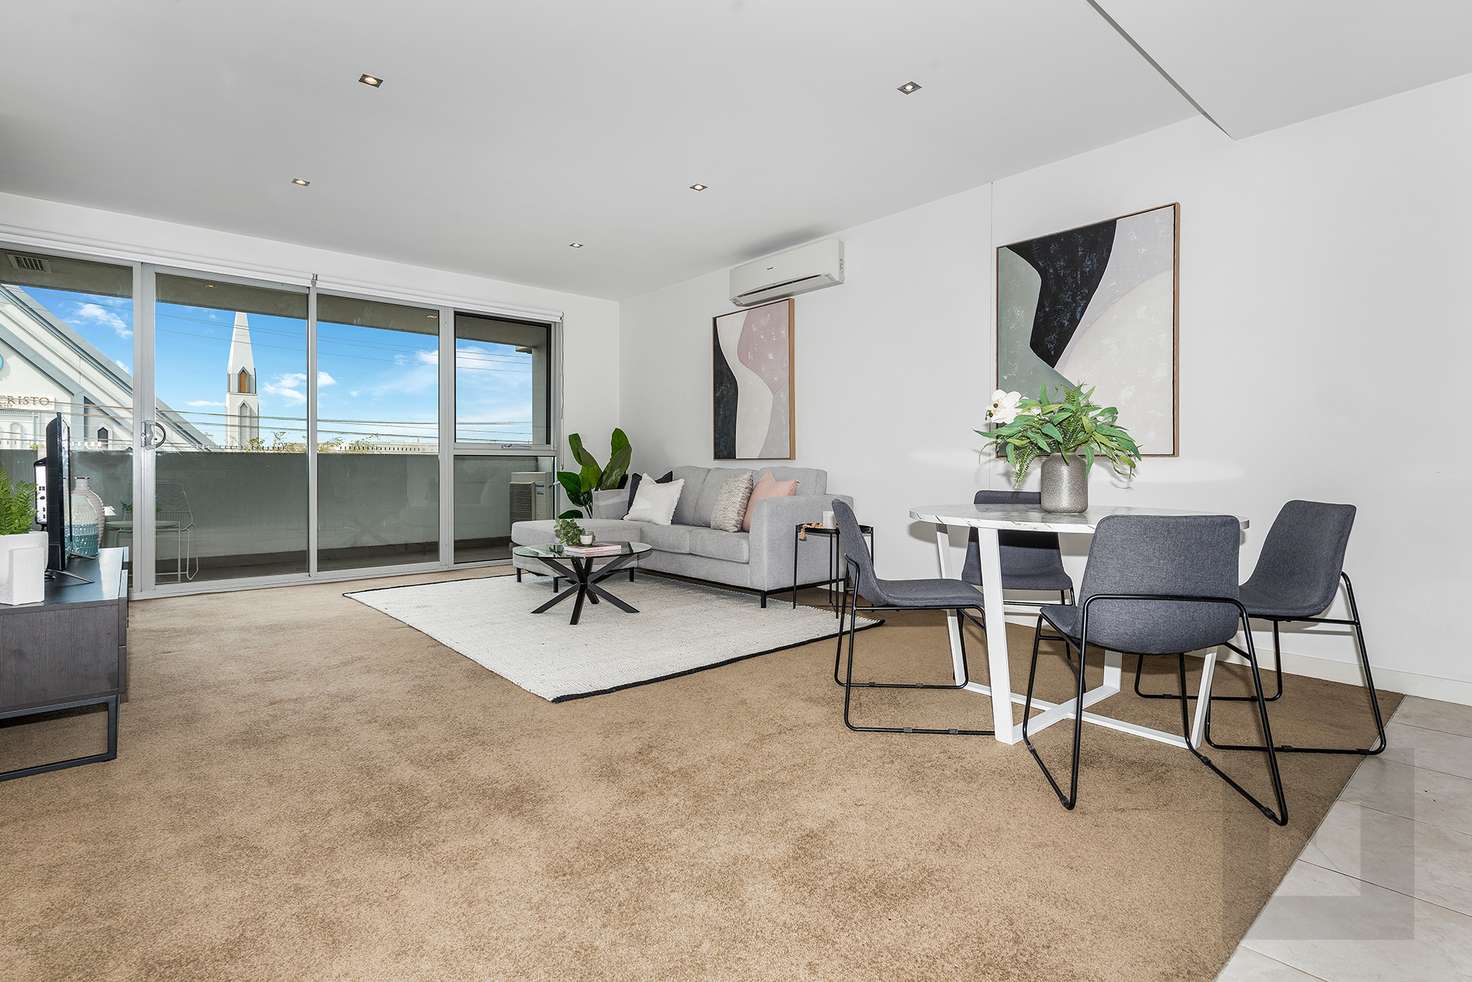 Main view of Homely apartment listing, 10/12 Crefden Street, Maidstone VIC 3012